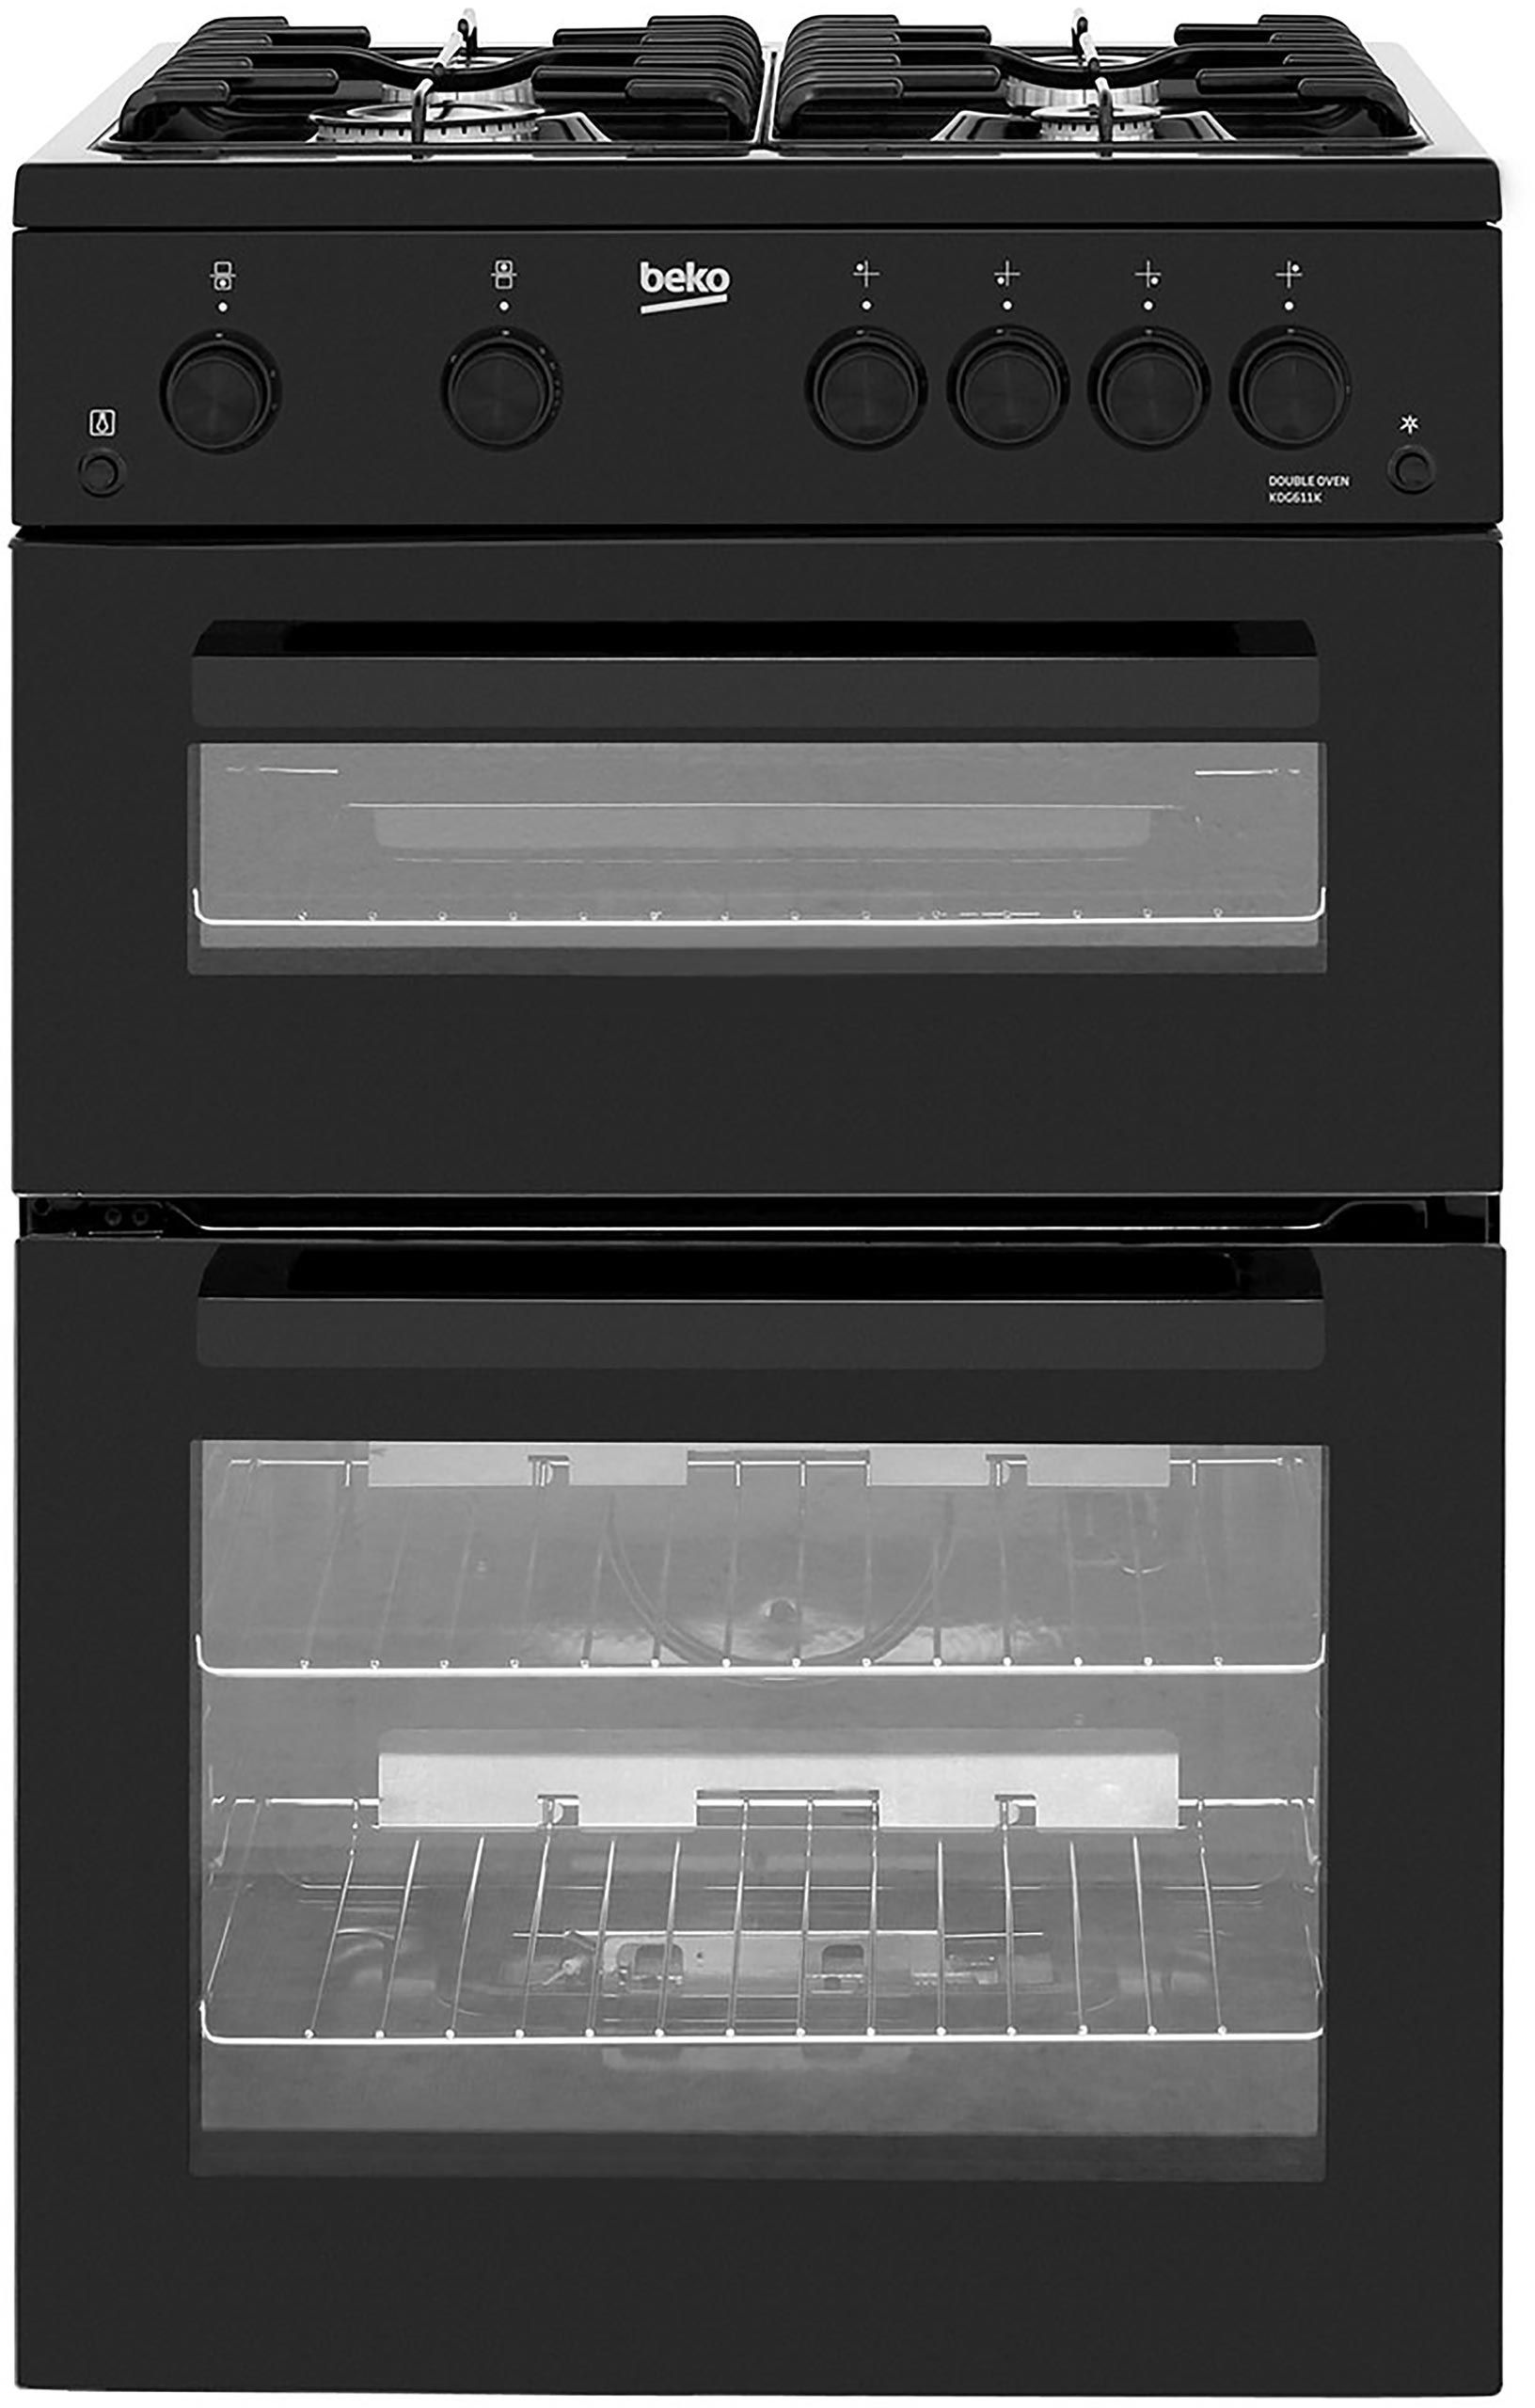 Beko KDG611K 60cm Freestanding Gas Cooker with Full Width Gas Grill - Black - A+/A Rated, Black